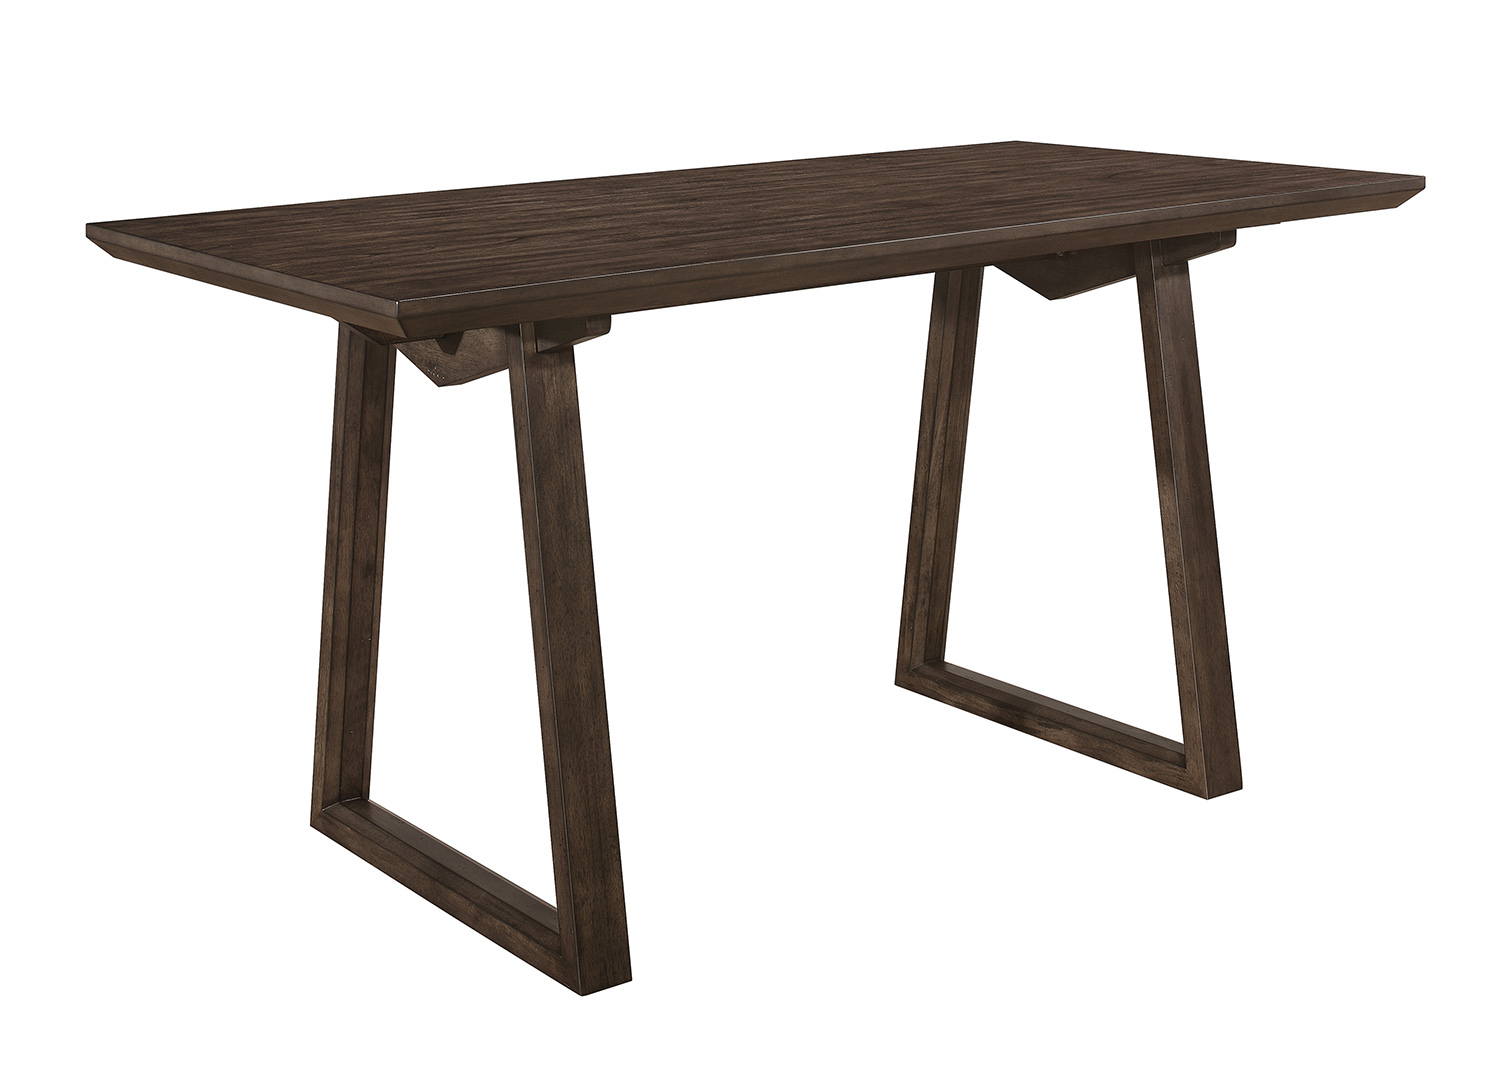 Homelegance Kirke Counter Height Dining Table - Brown